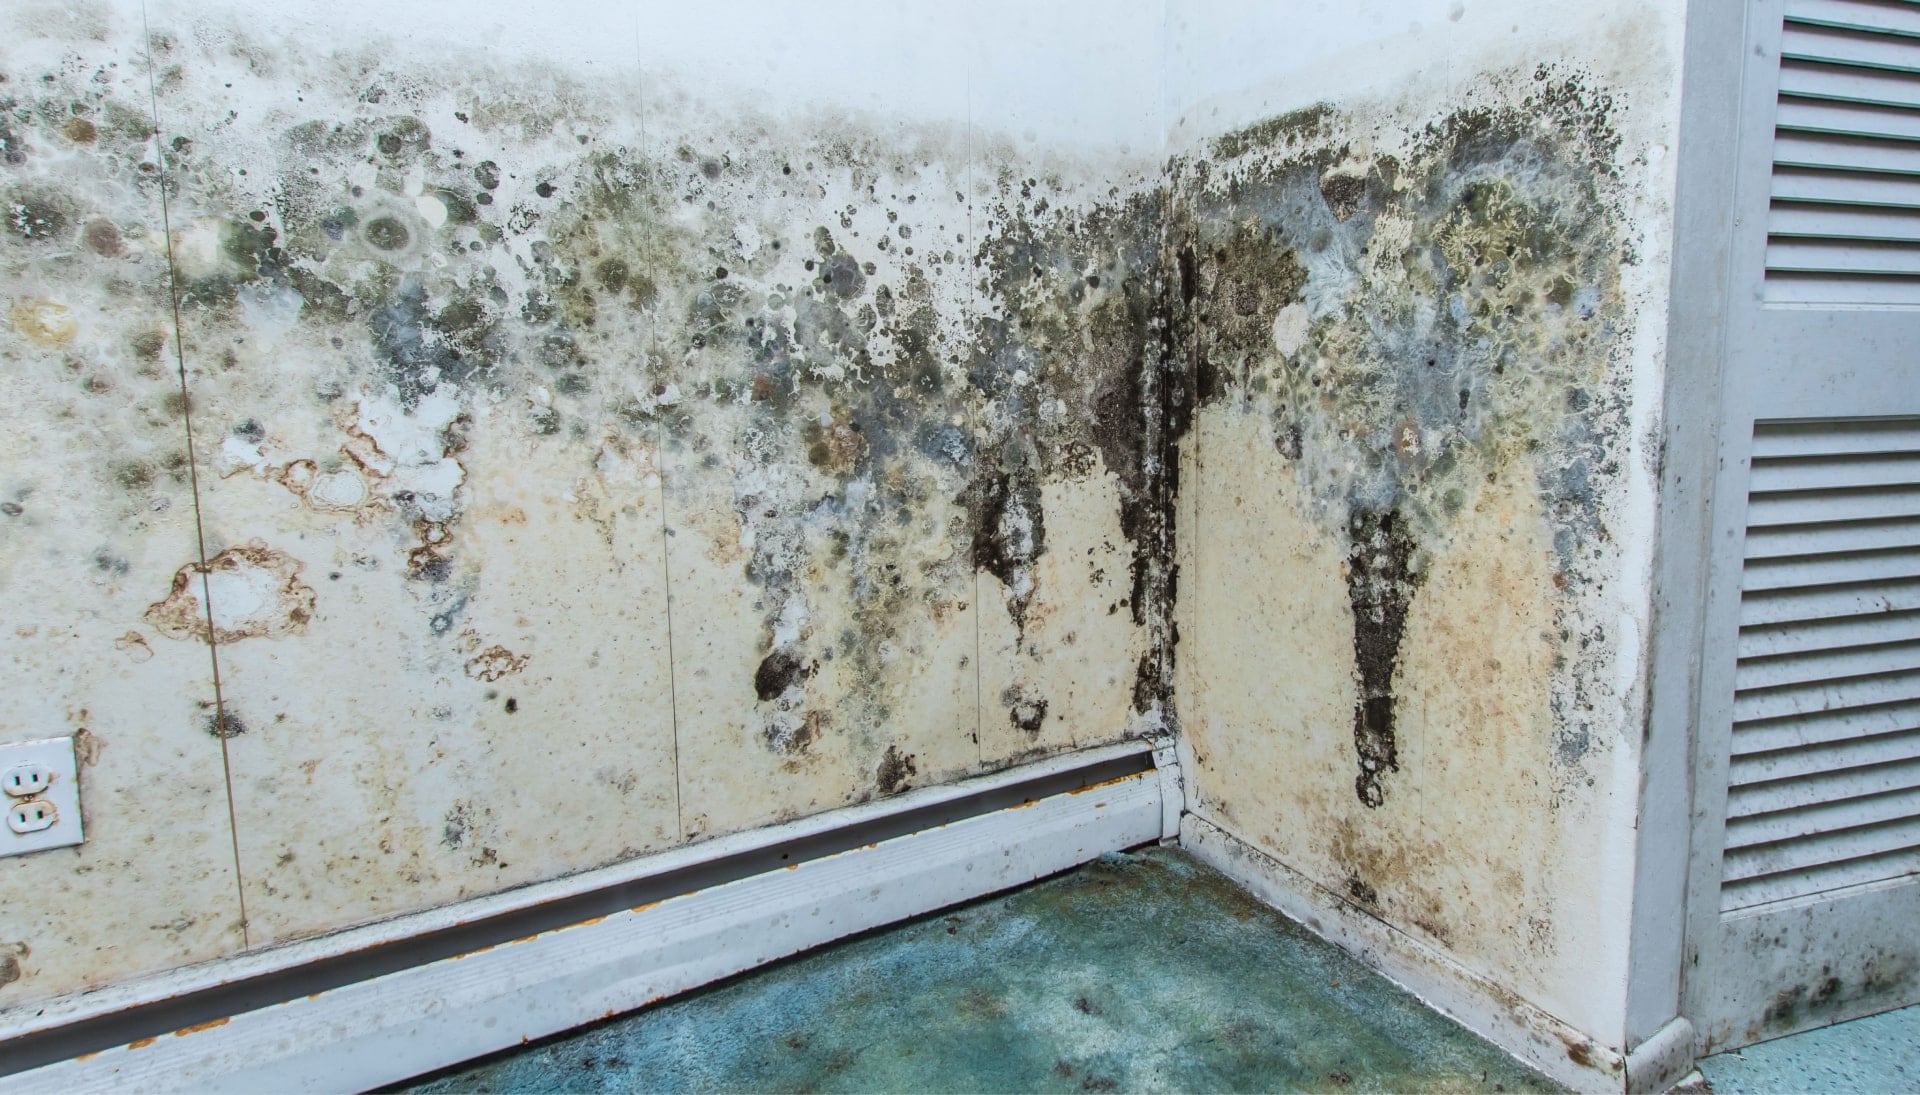 Professional mold removal, odor control, and water damage restoration service in Chattanooga, Tennessee.